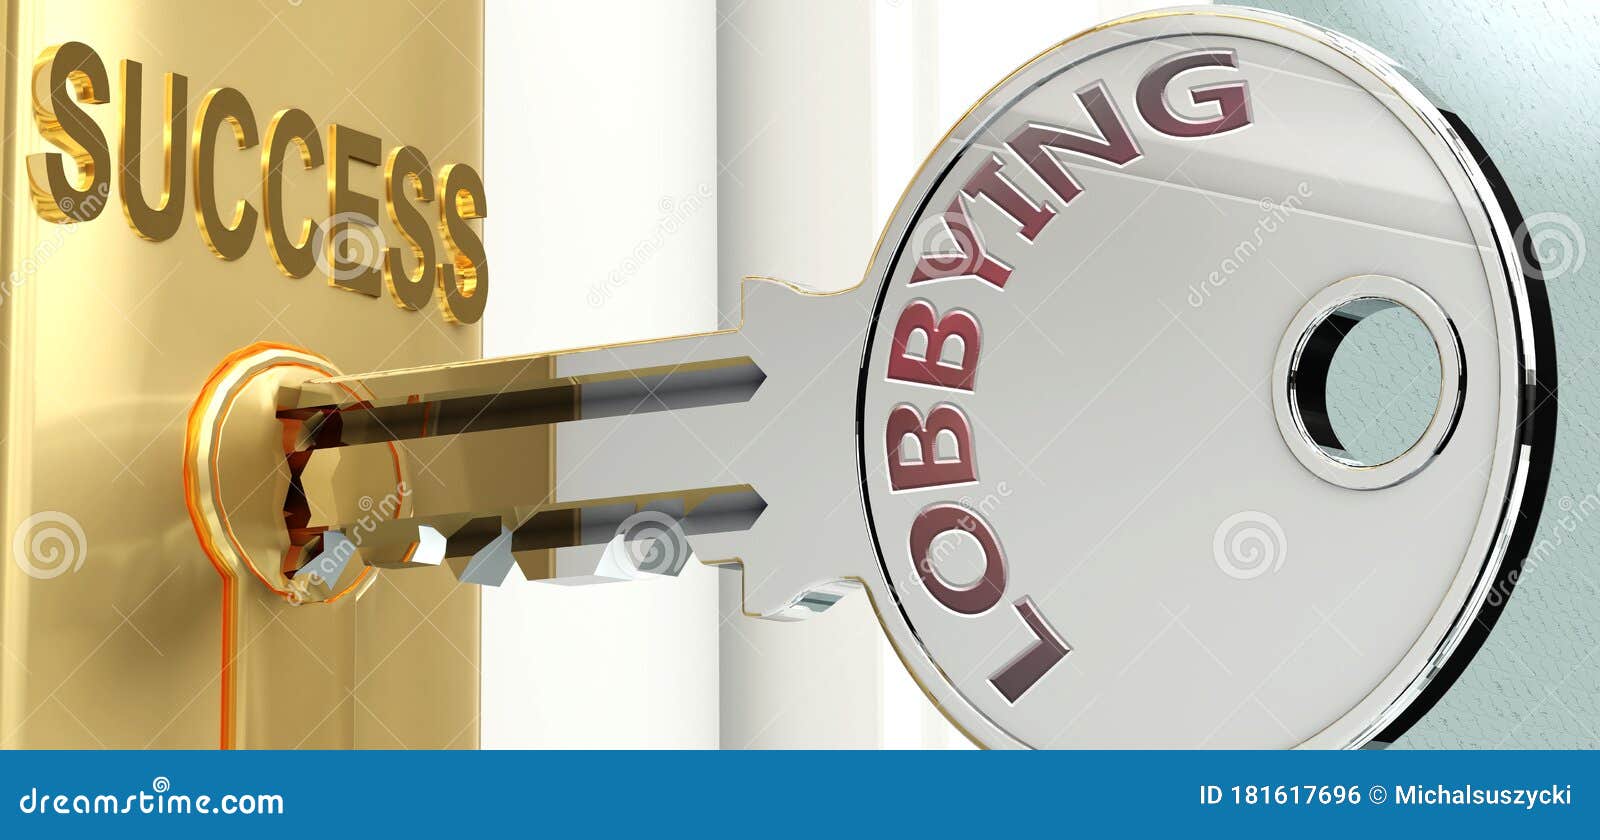 lobbying and success - pictured as word lobbying on a key, to ize that lobbying helps achieving success and prosperity in